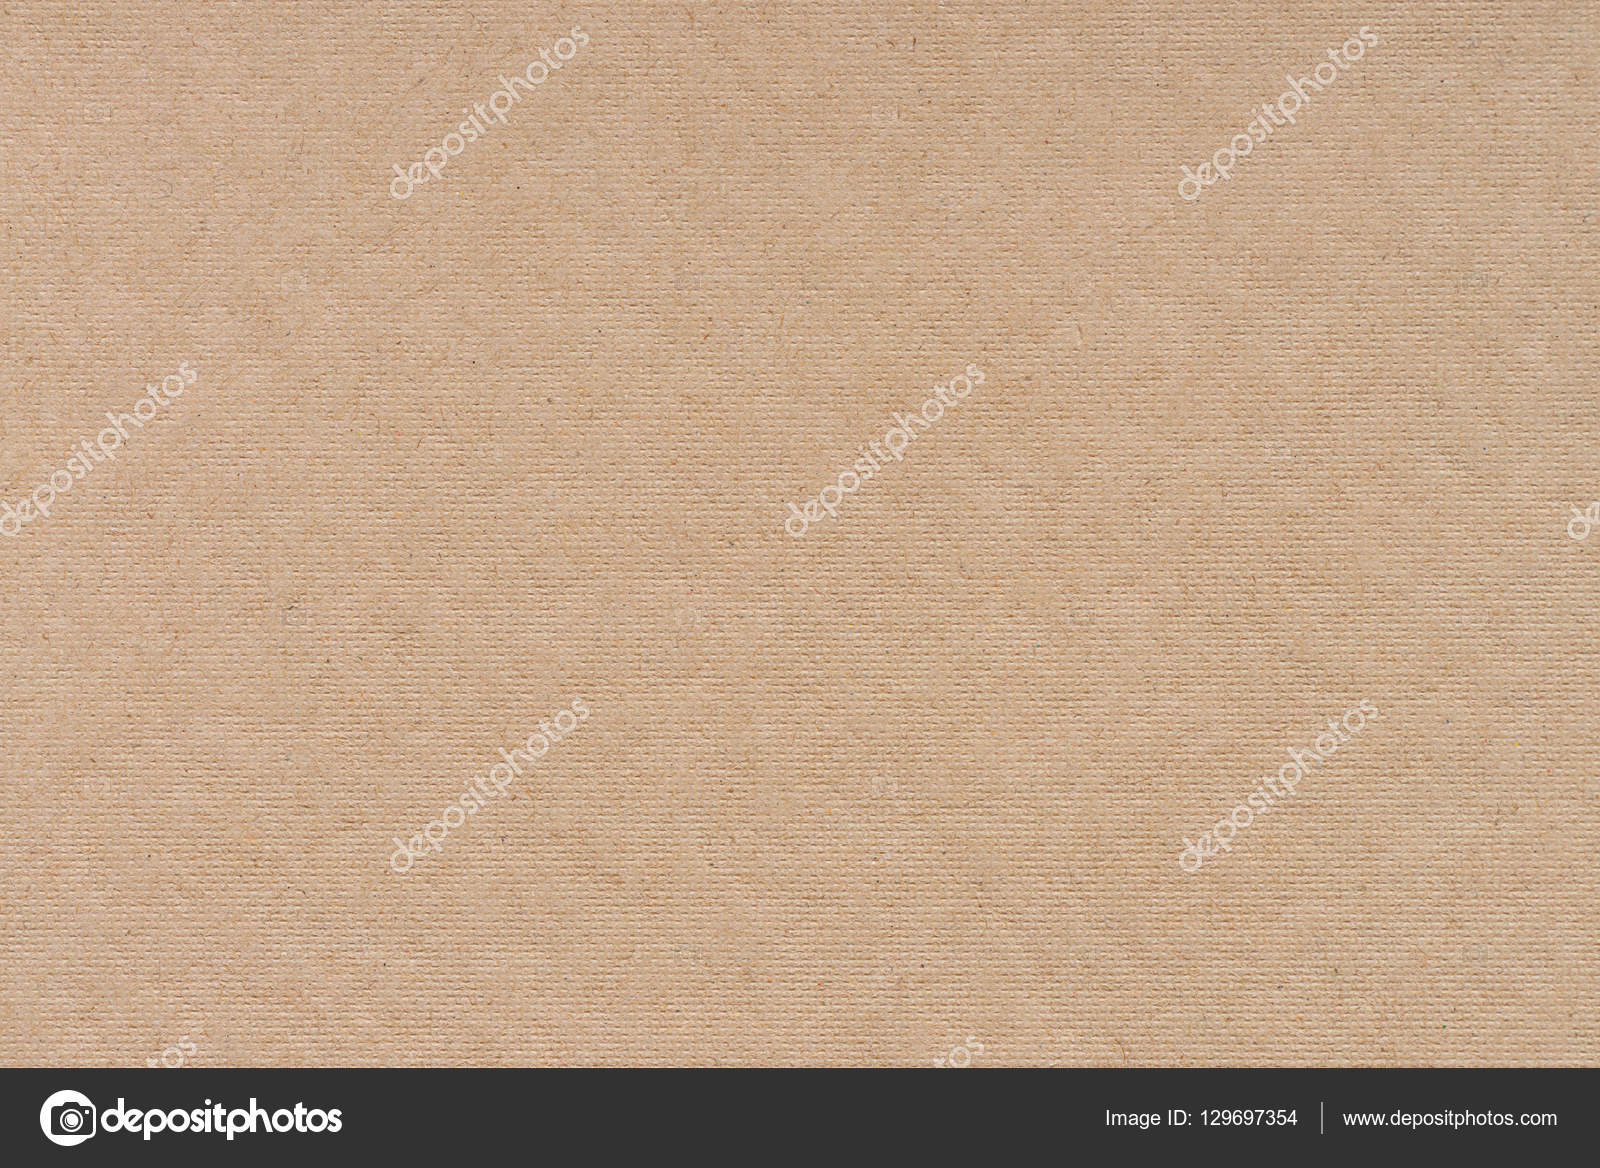 Brown Craft Paper Texture Full Frame Stock Photo by ©abramovaelena